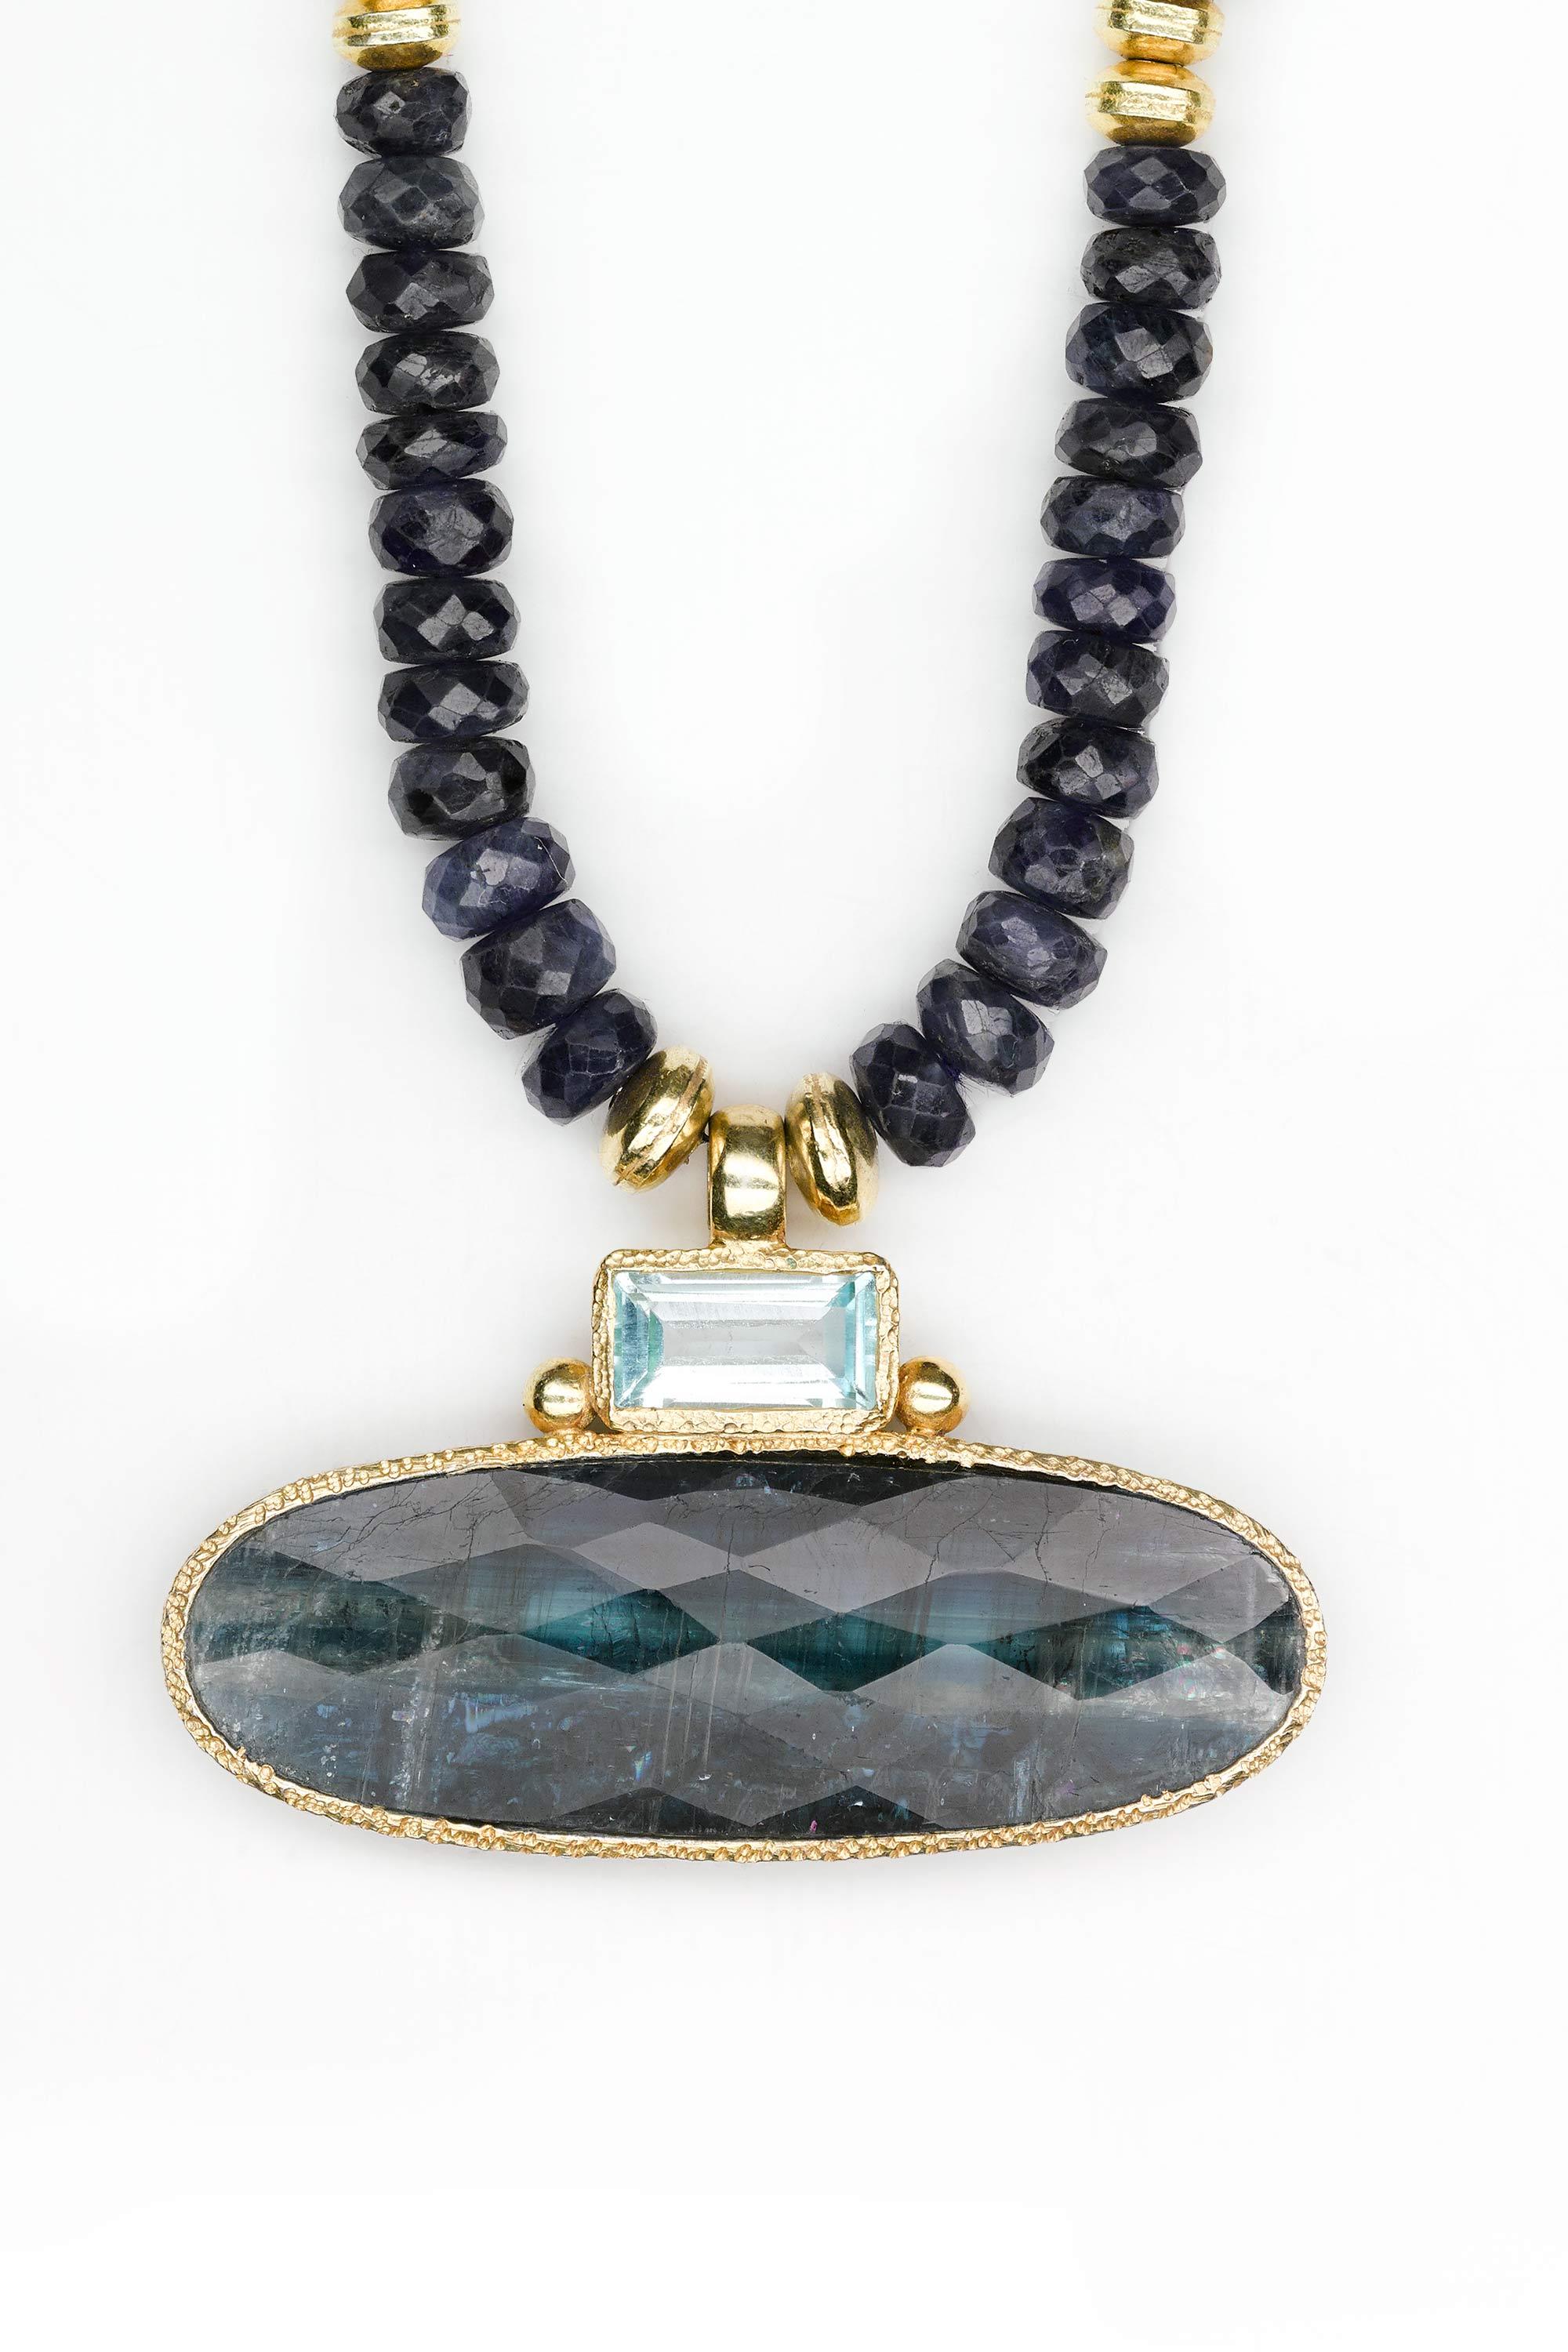 Sapphire and Kyanite 24 K gold vermeil pendant  with faceted sapphire bead necklace. 
Pendant measures 1.75 inches width. Sapphire beads dangle at back of neck when clasped.